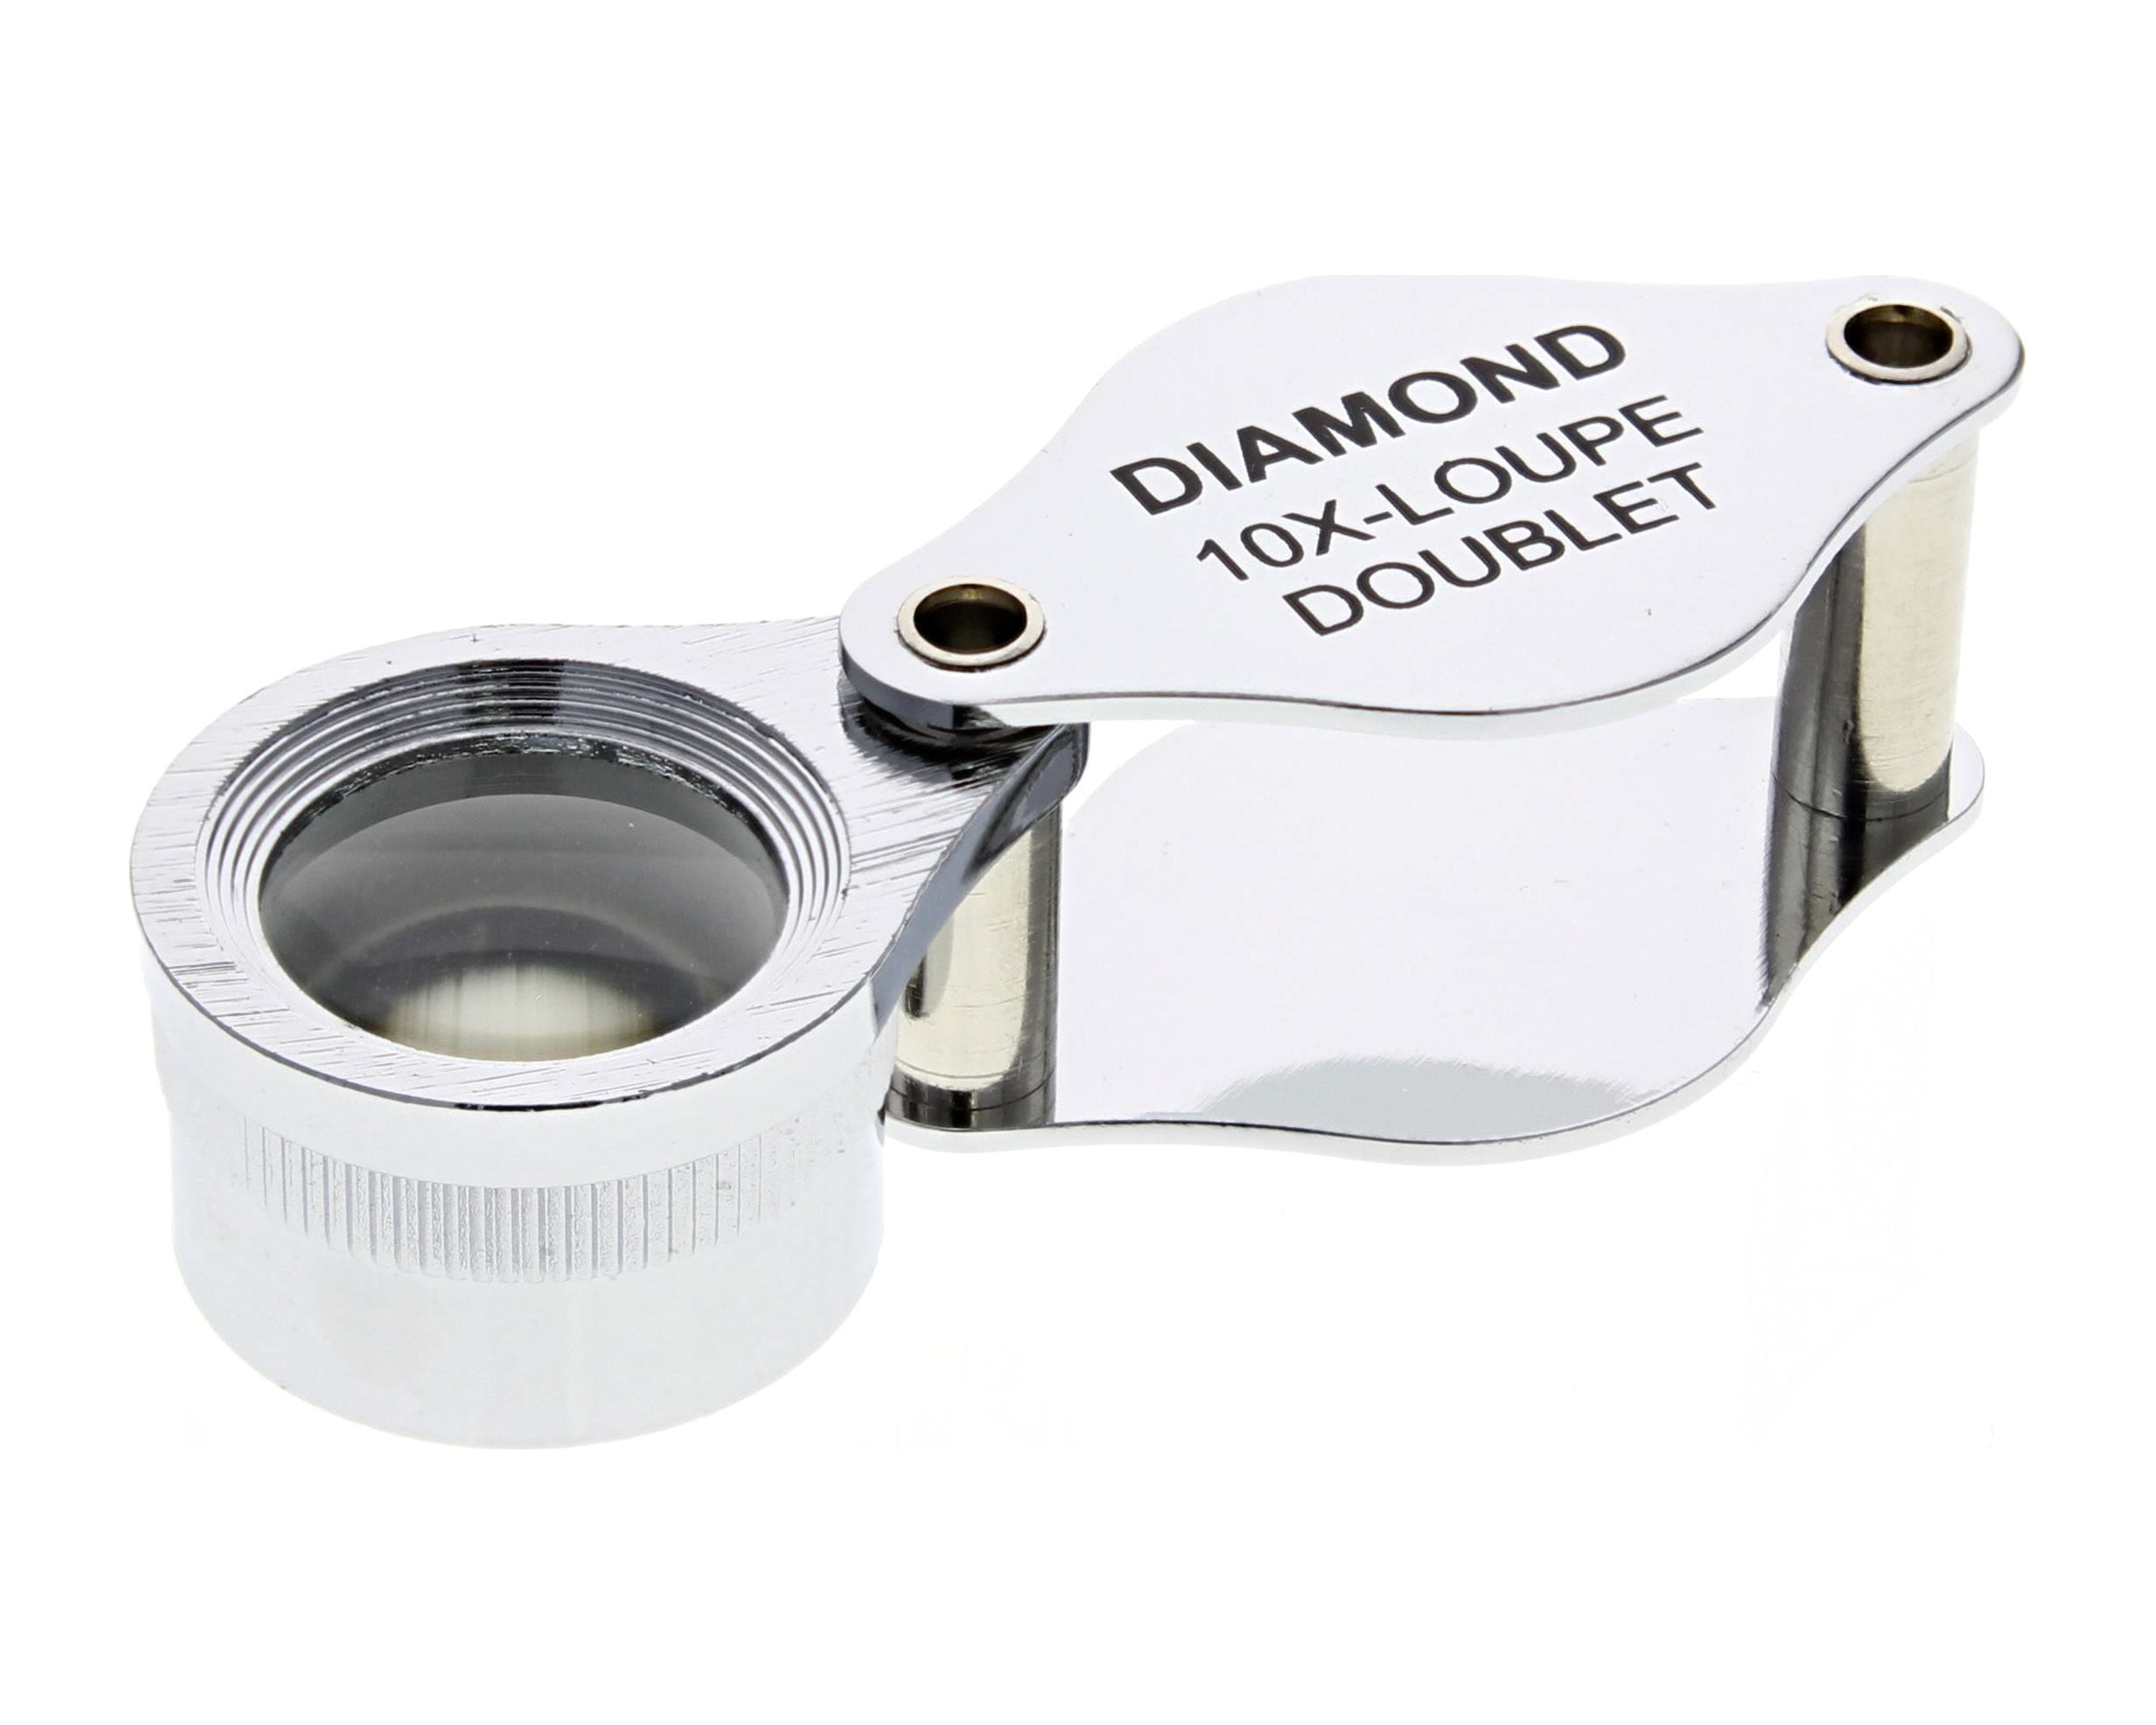 JEWELERS LOUPE 10X POWER DIAMOND DOUBLET LOUPE SILVER MAGNIFIER TOOL  S/STEEL 